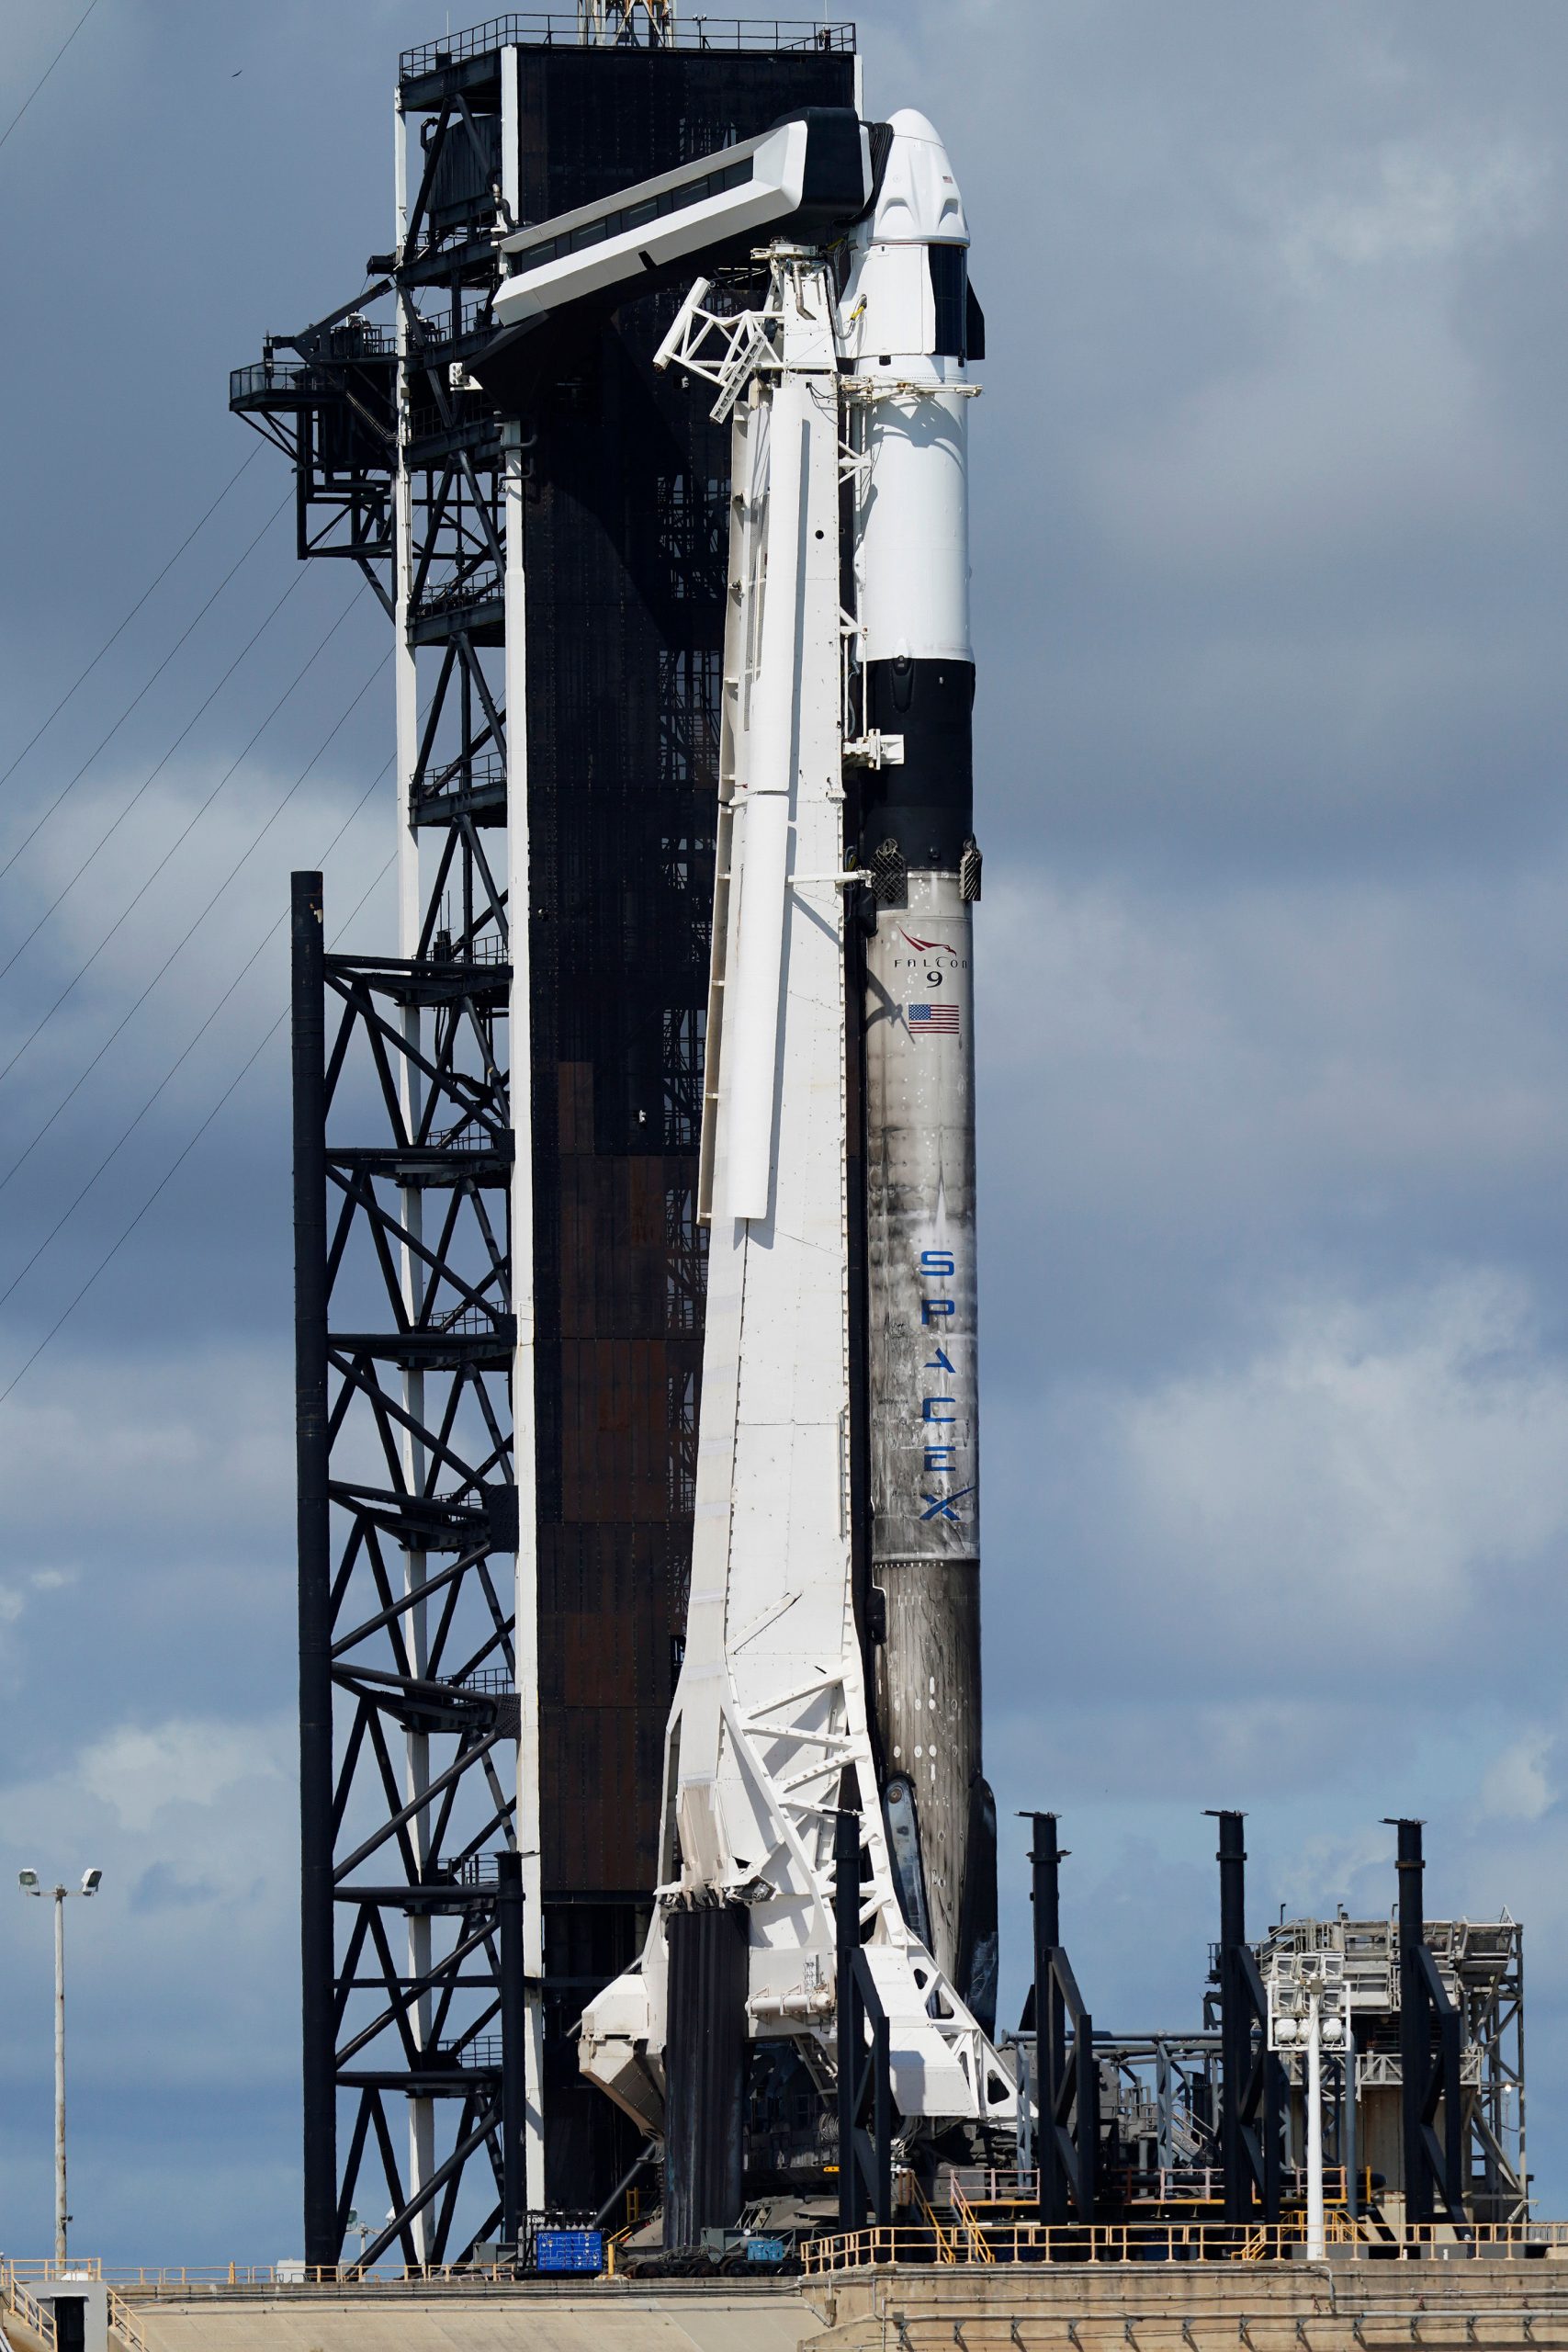 All you need to know about SpaceX’s Inspiration4 mission